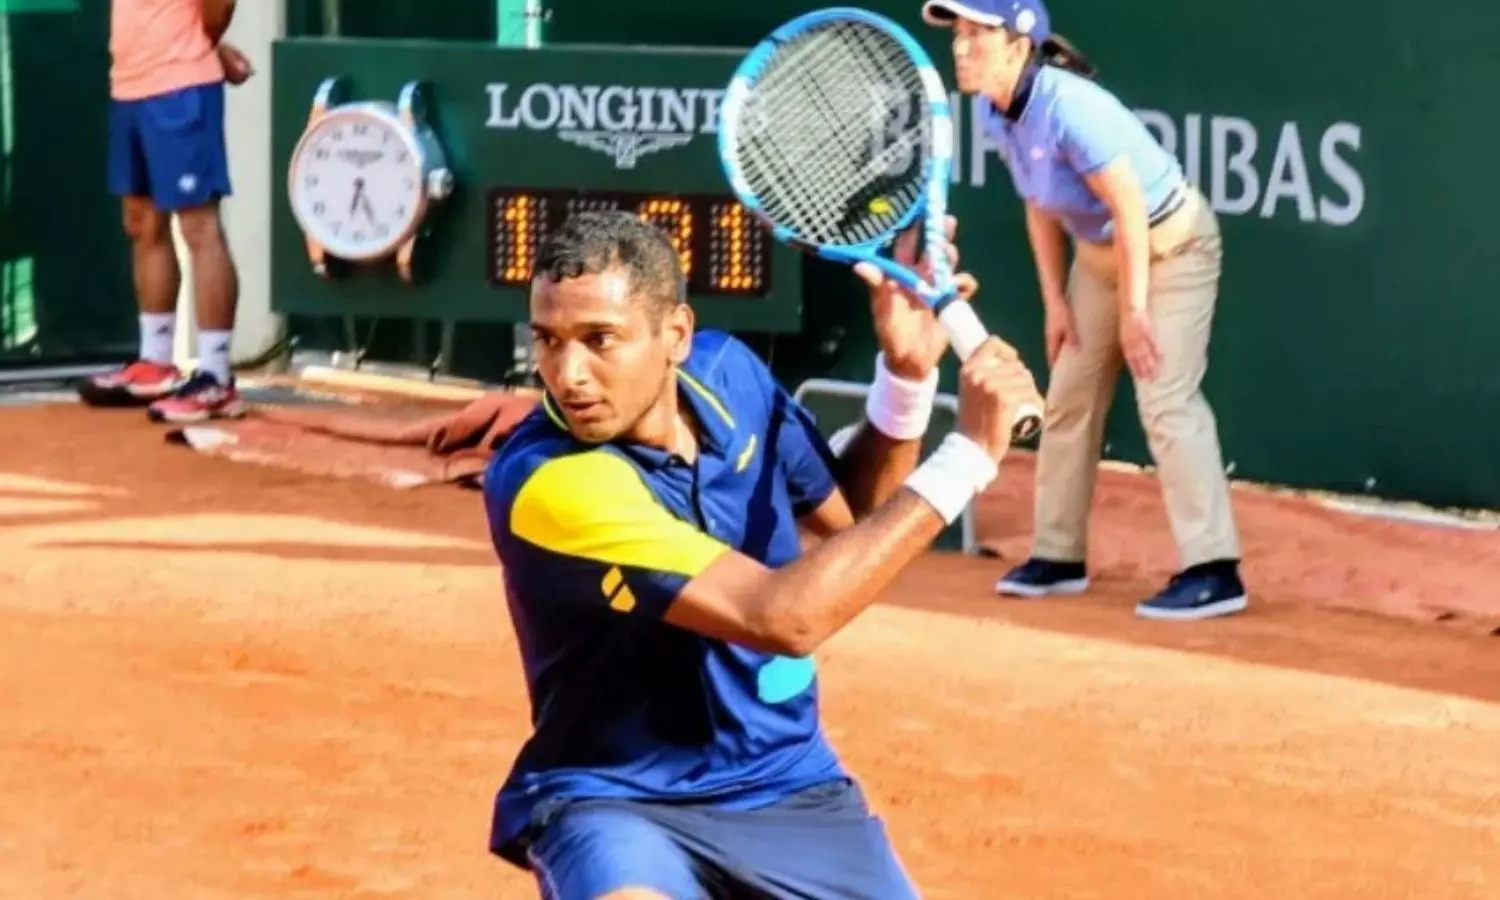 French Open 2022 | Ramkumar Ramanathan wins his first grand slam match, moves to second round in men's doubles